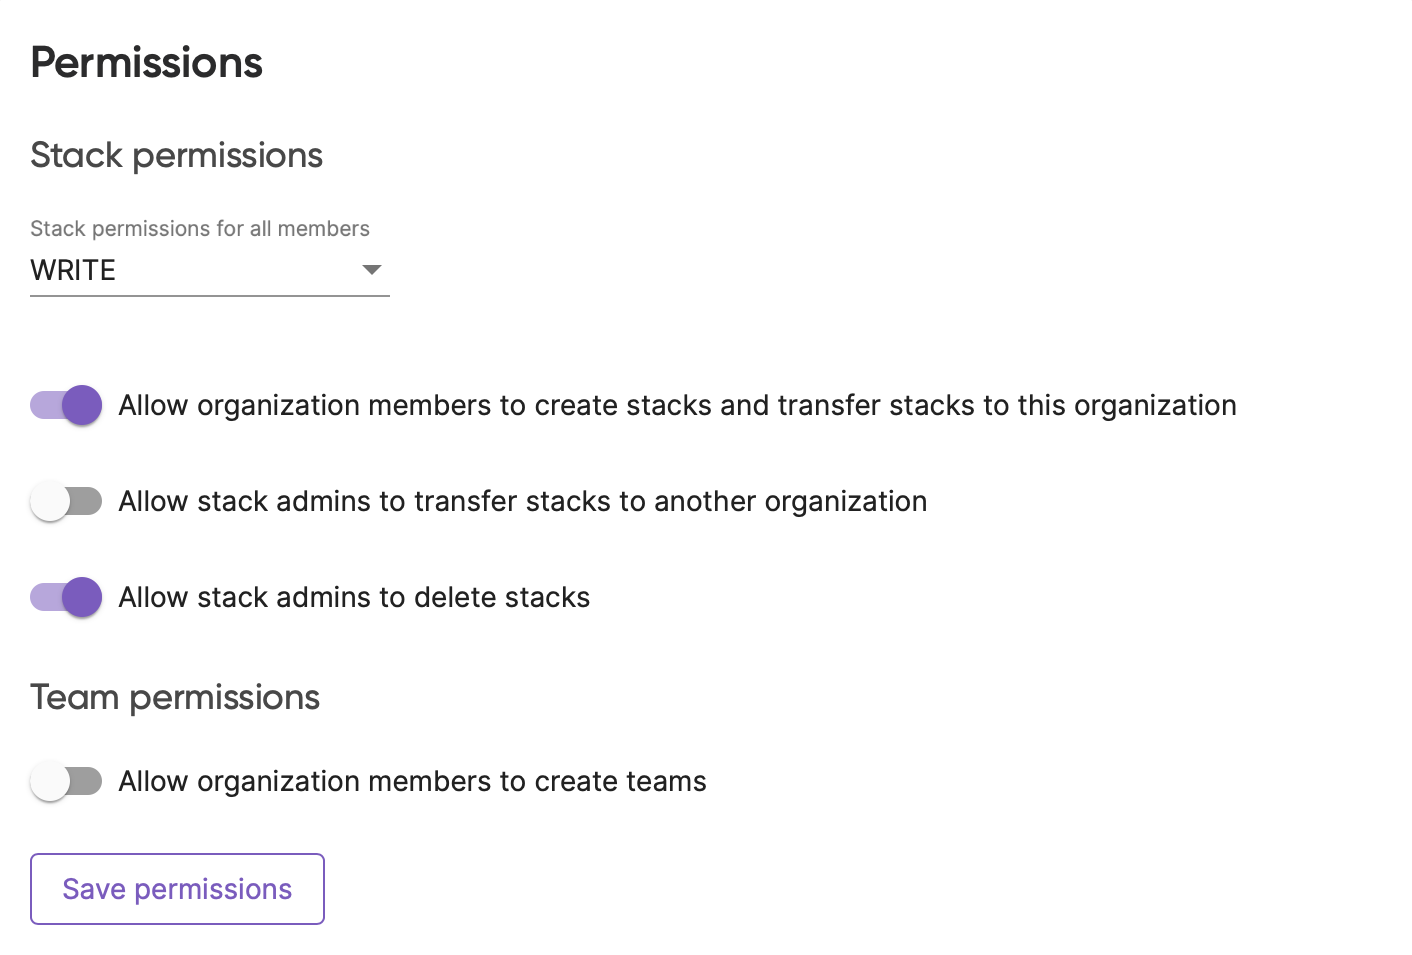 Screenshot showing the default stack permissions for all members